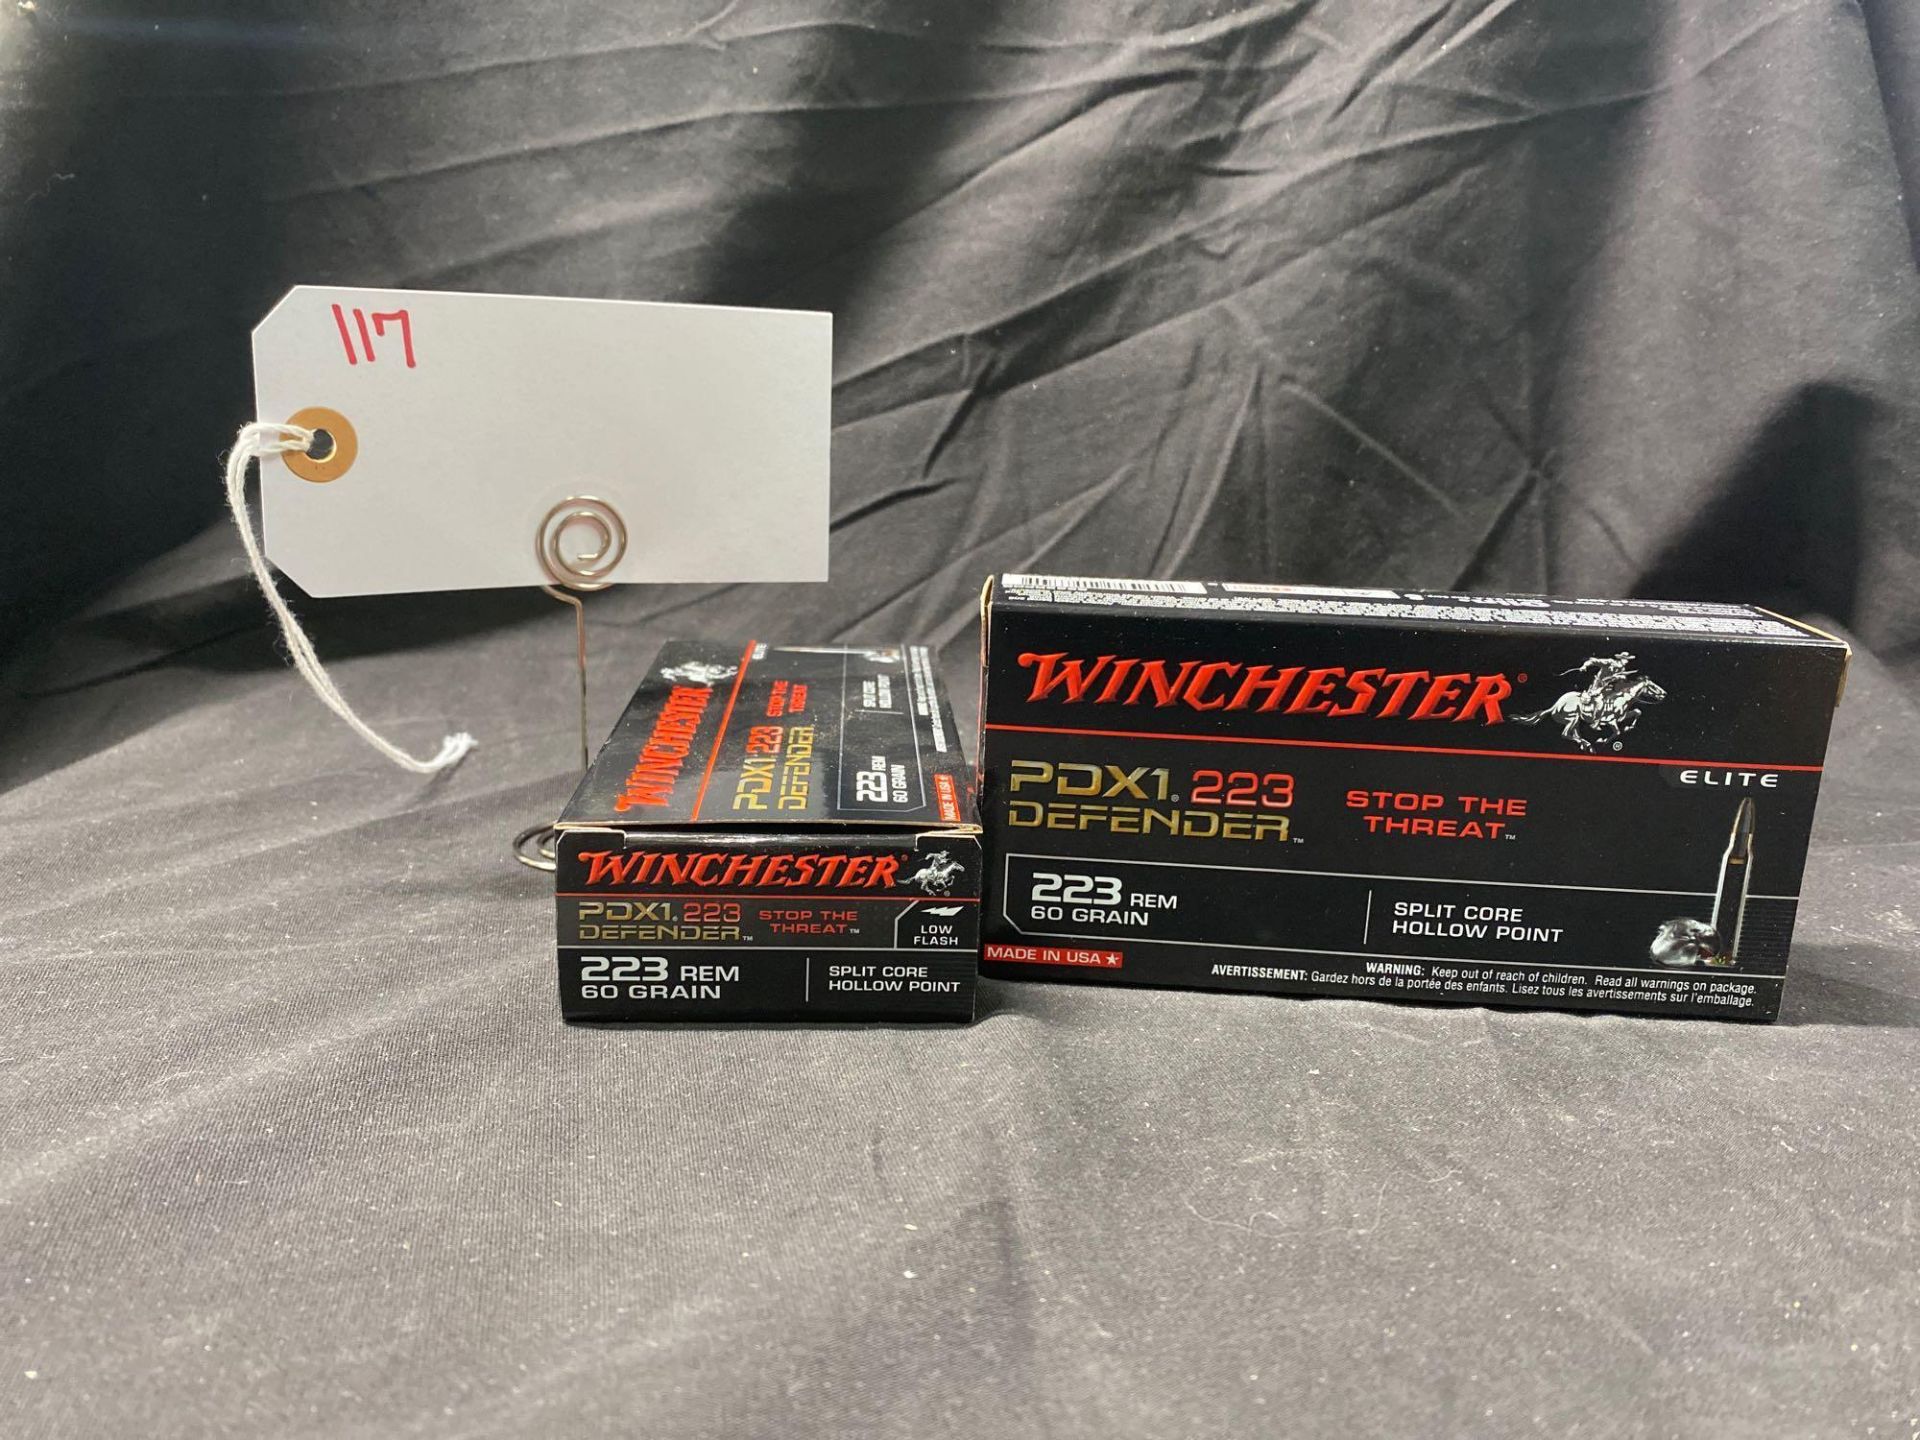 WINCHESTER PDX1, 223 CAL, HOLLOW POINT (X2)